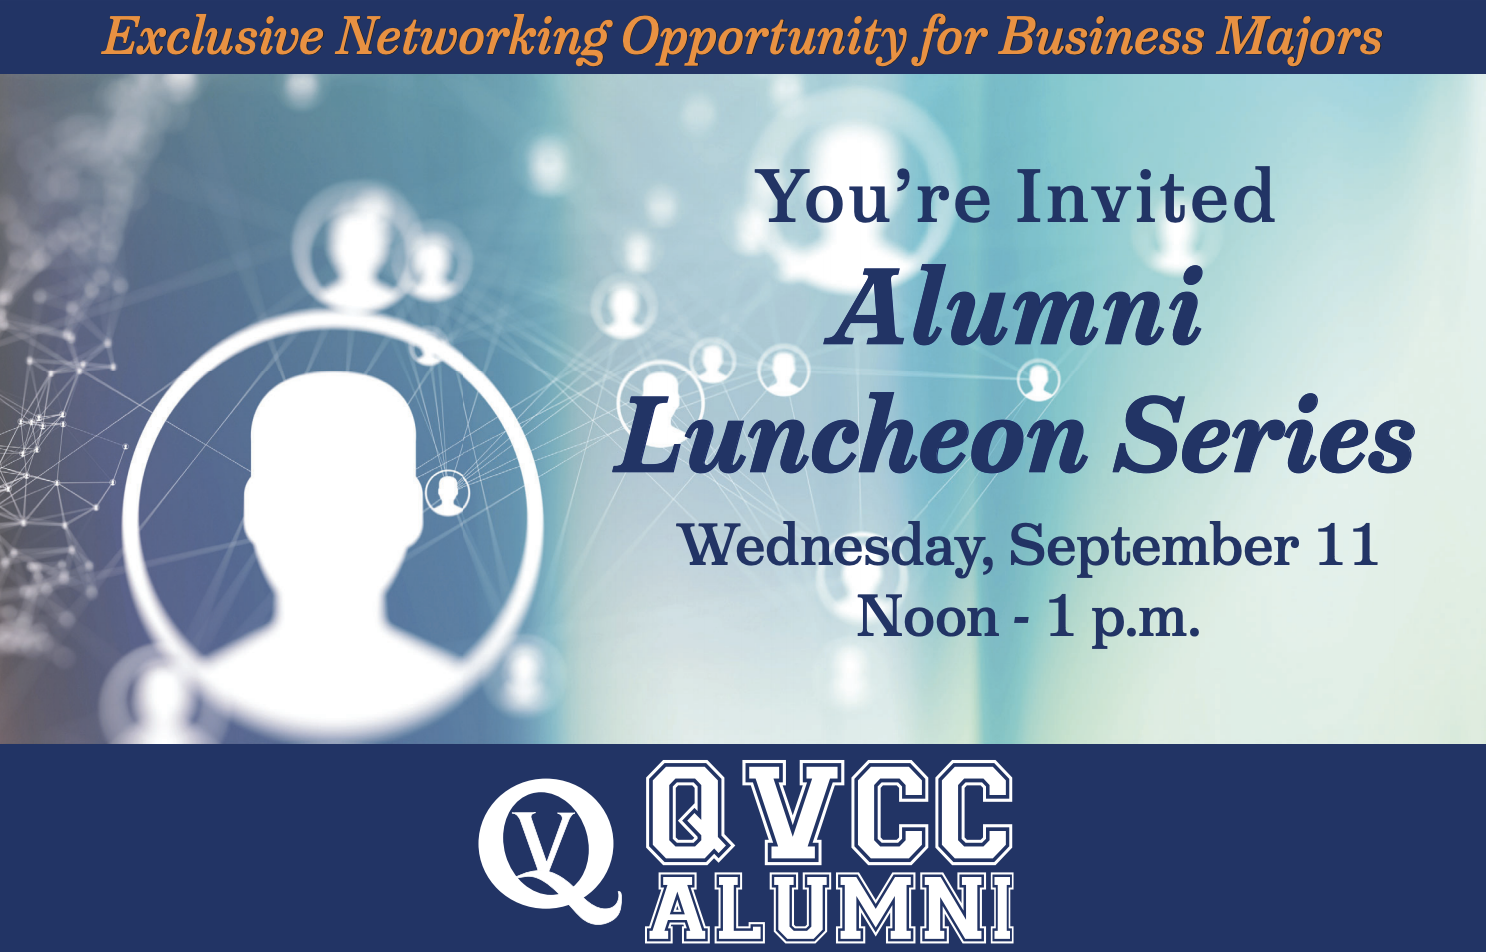 Alumni Luncheon Series with Steve Townsend